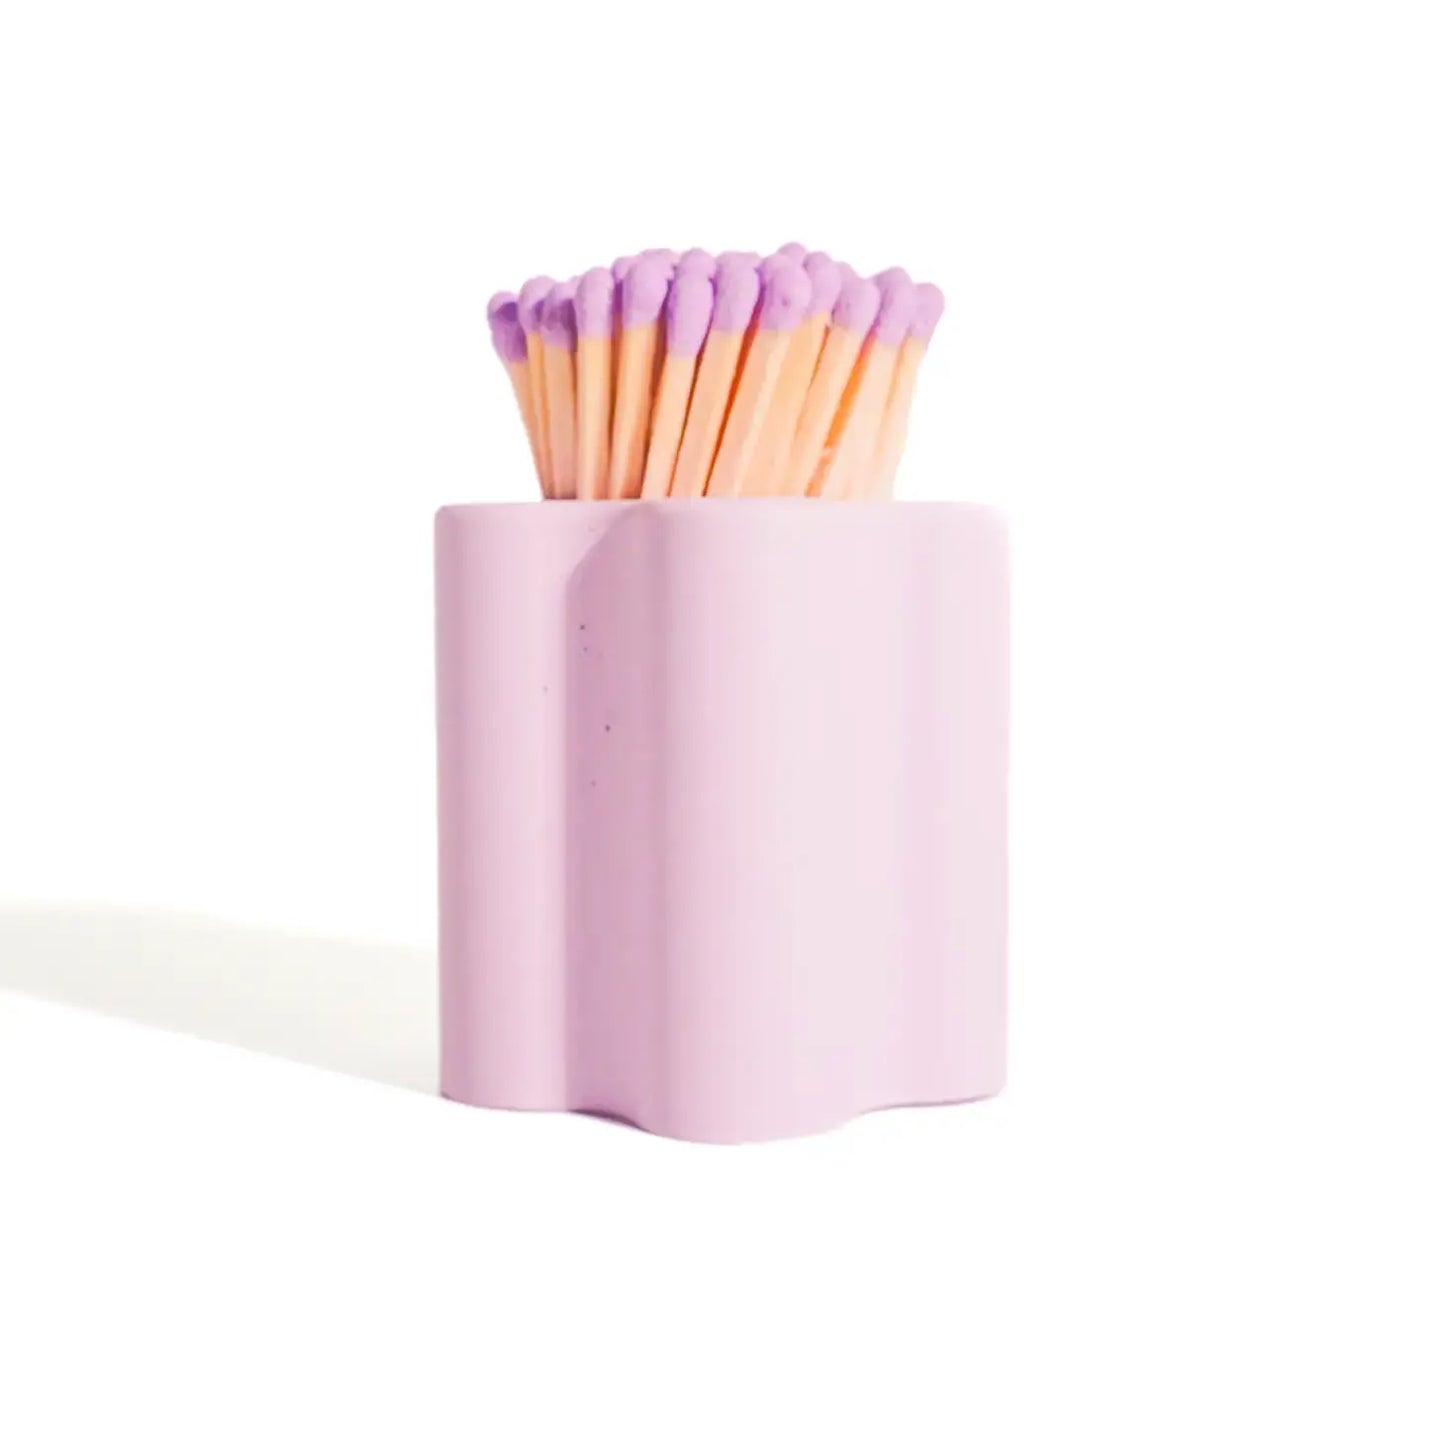 Pastel Flower Vessel with Colorful Matchsticks: Purple